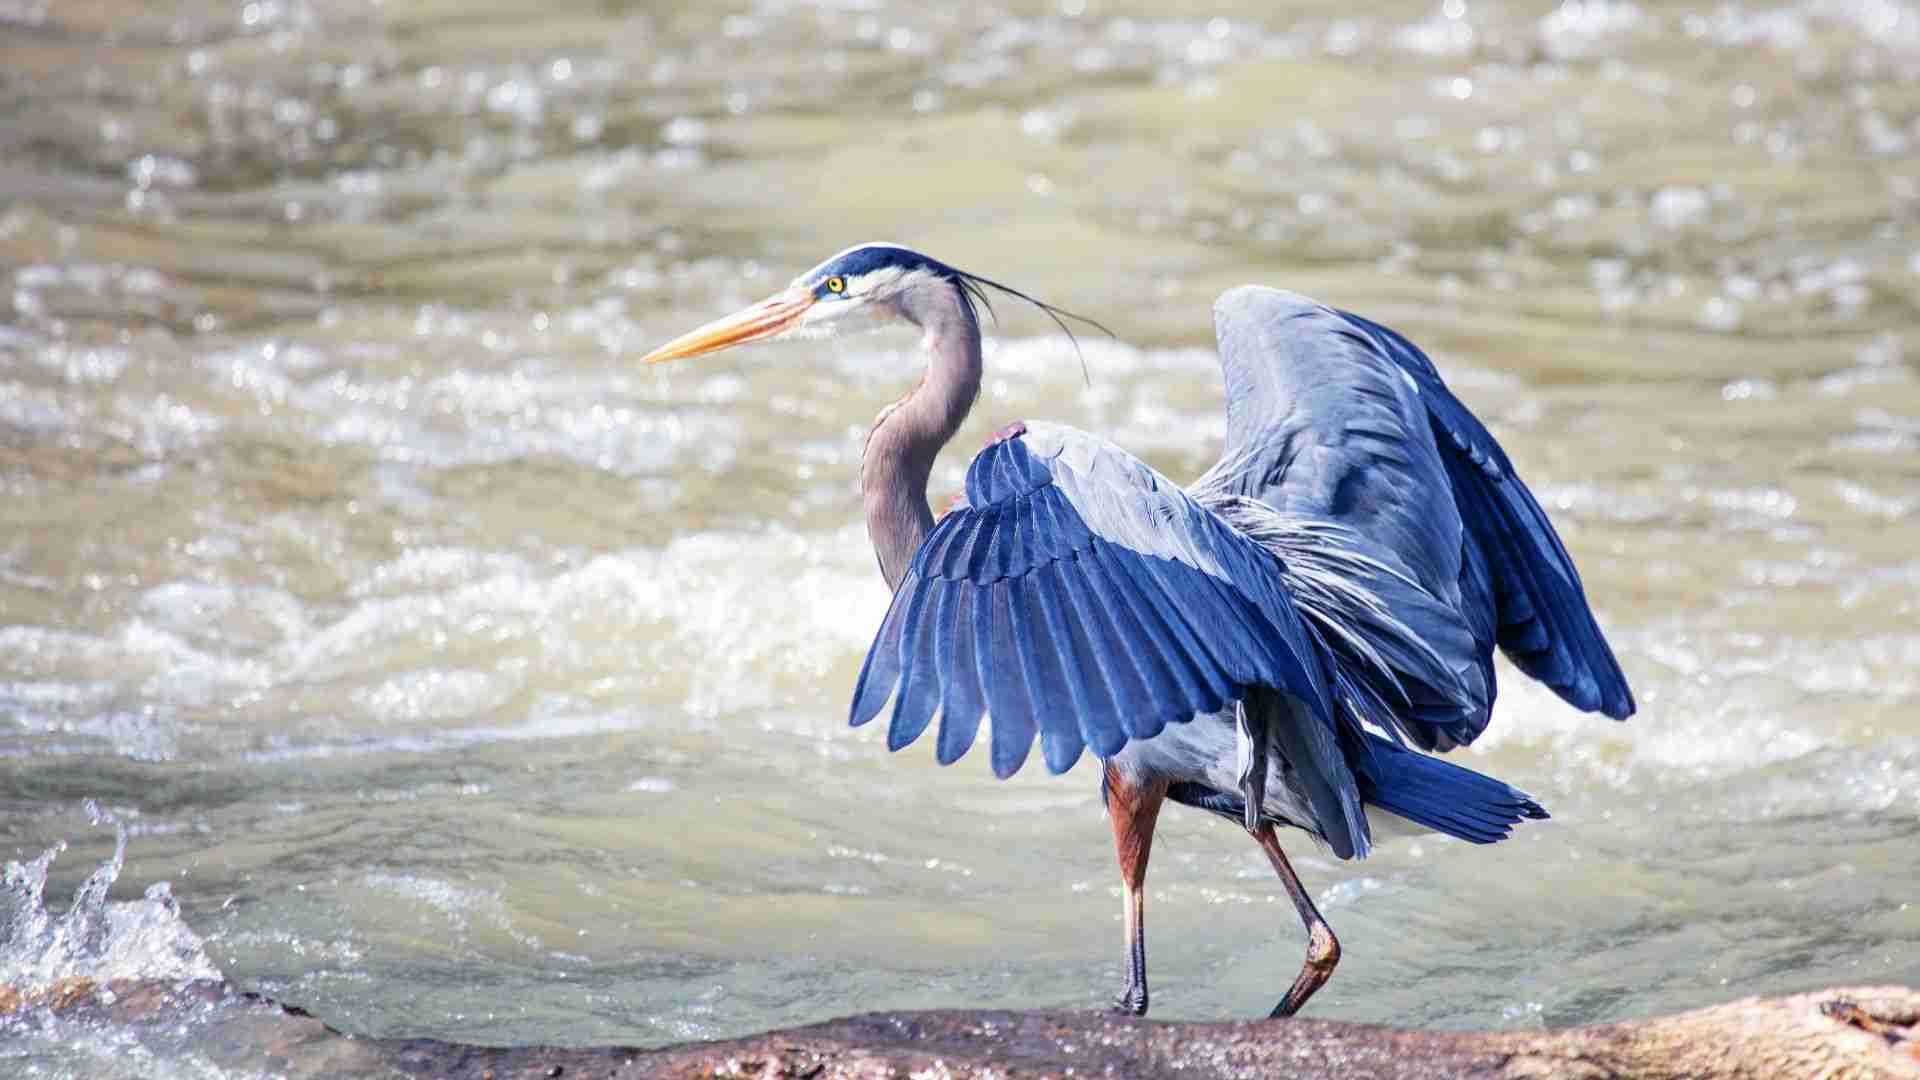 How Do I Protect My Fish Pond From Herons? (6 Methods)